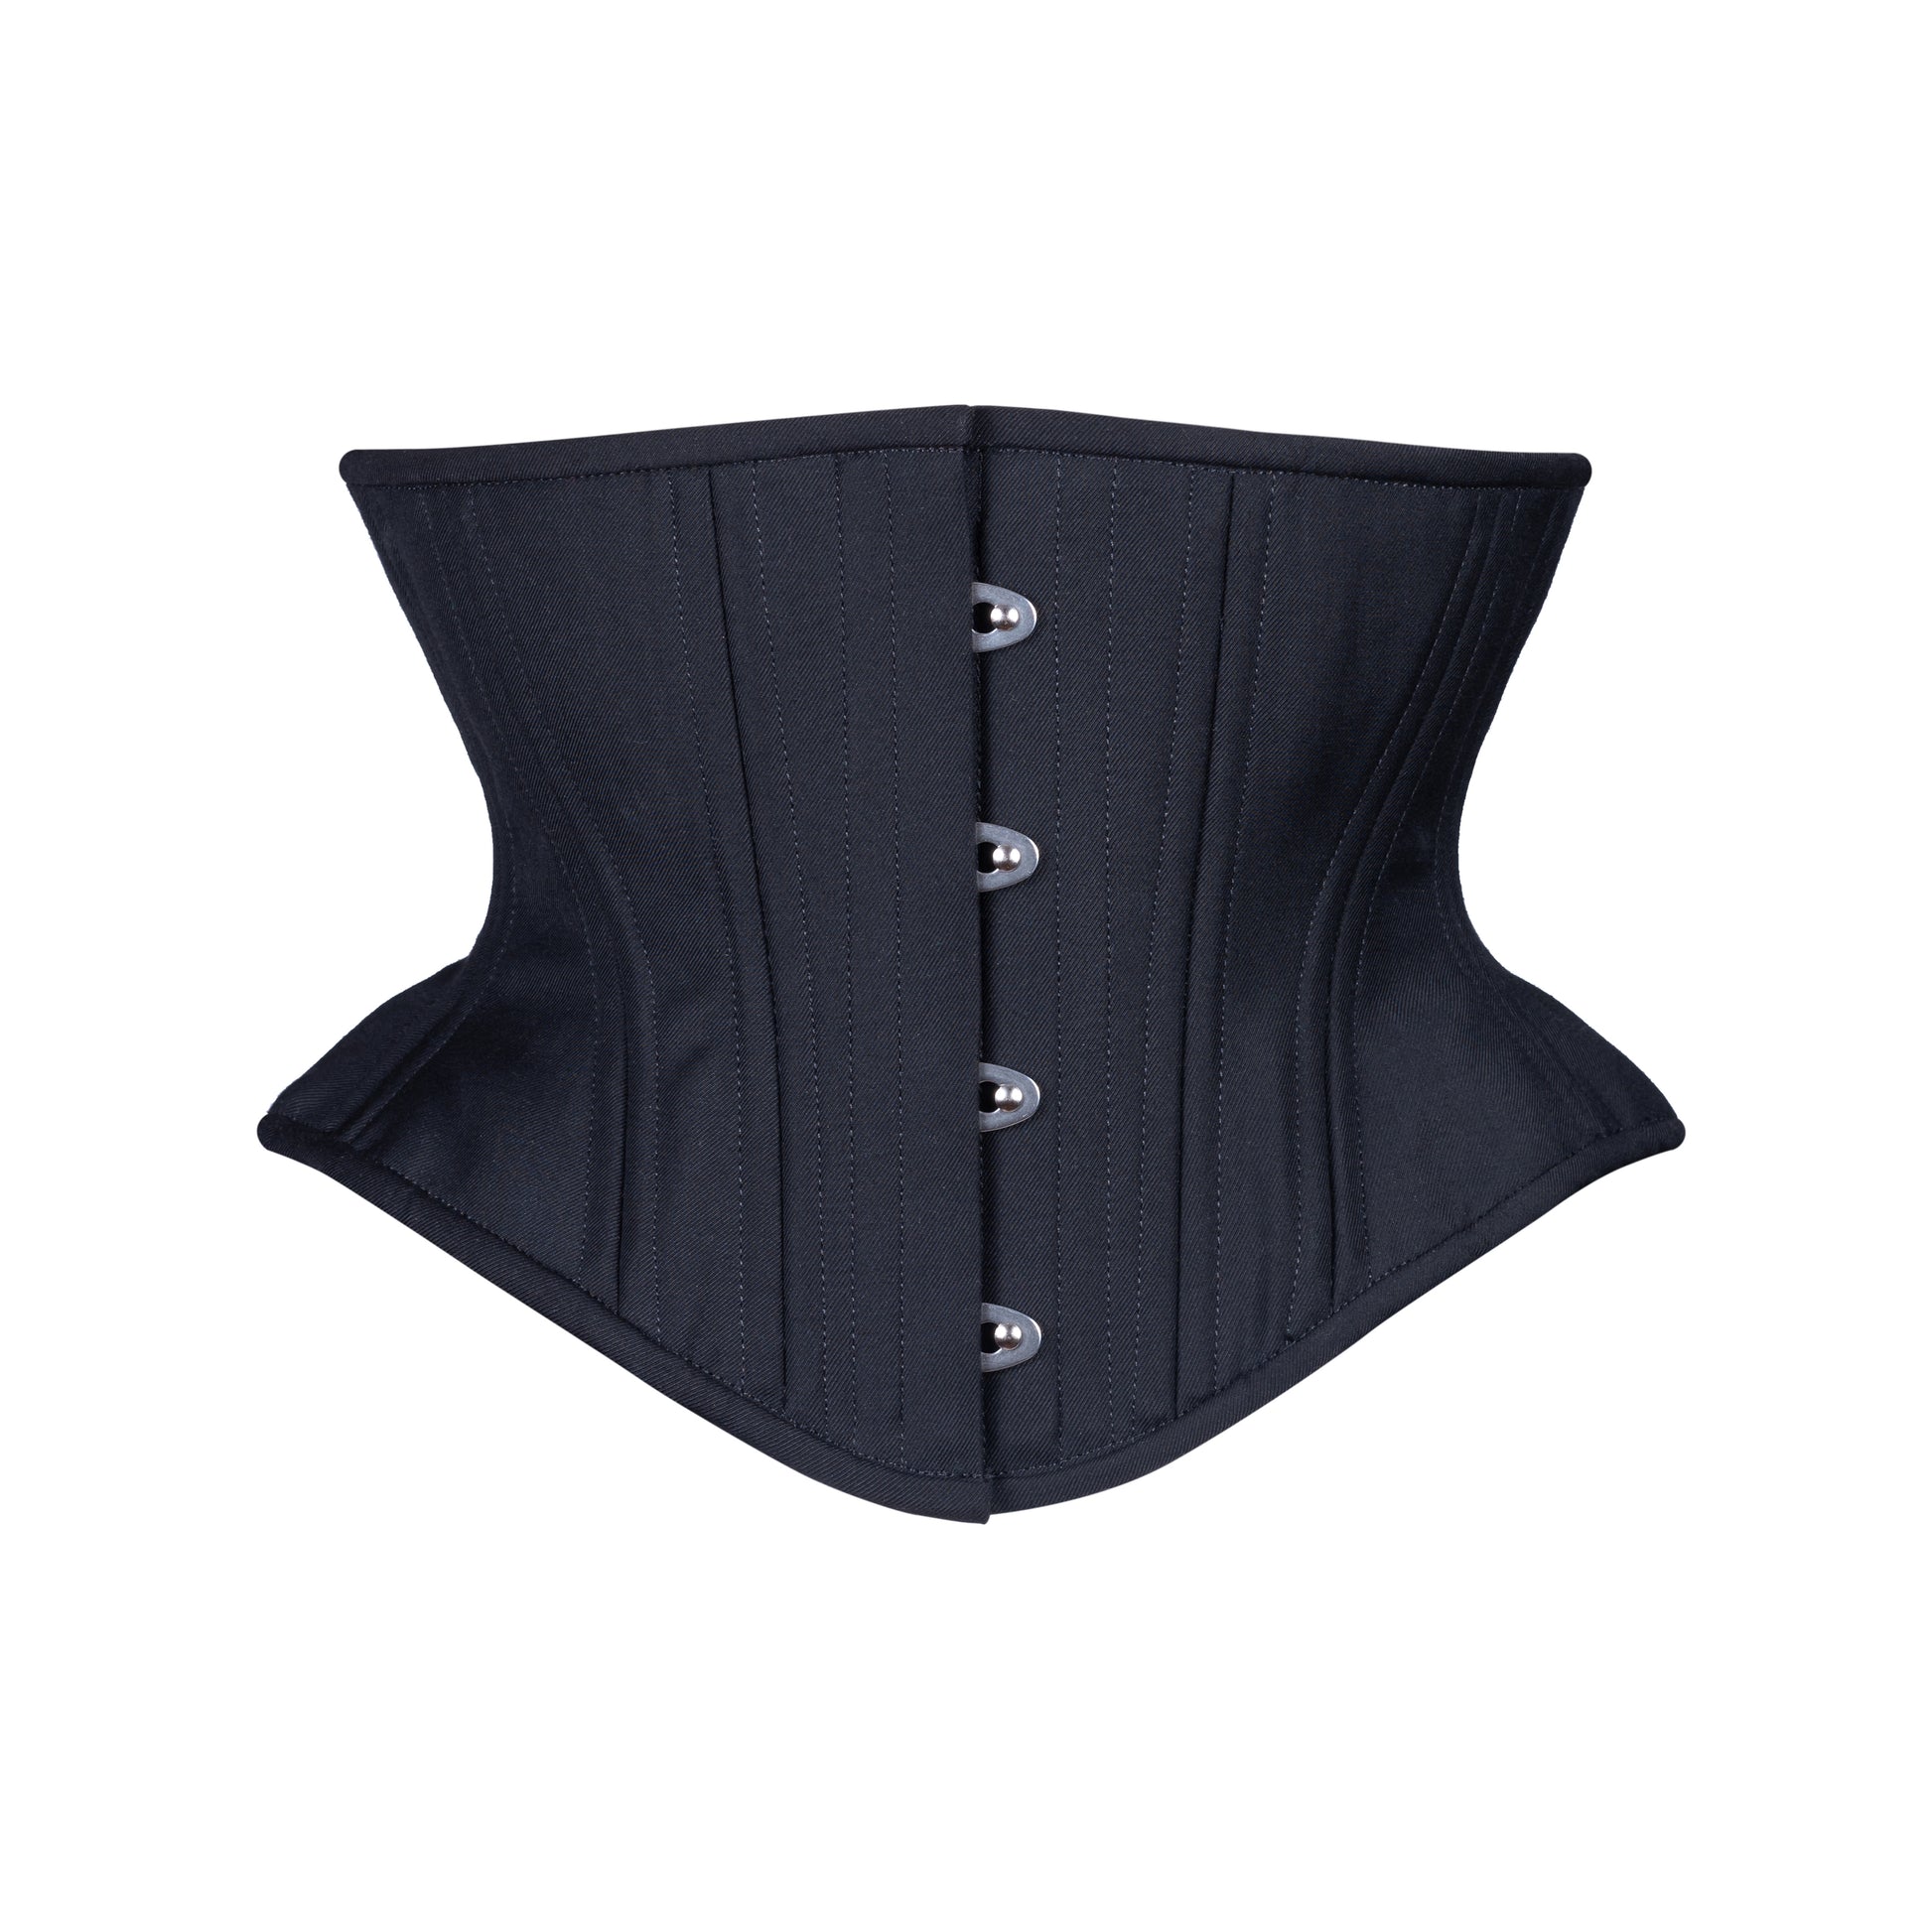 Corset fitting issues, help appreciated!!! : r/corsets